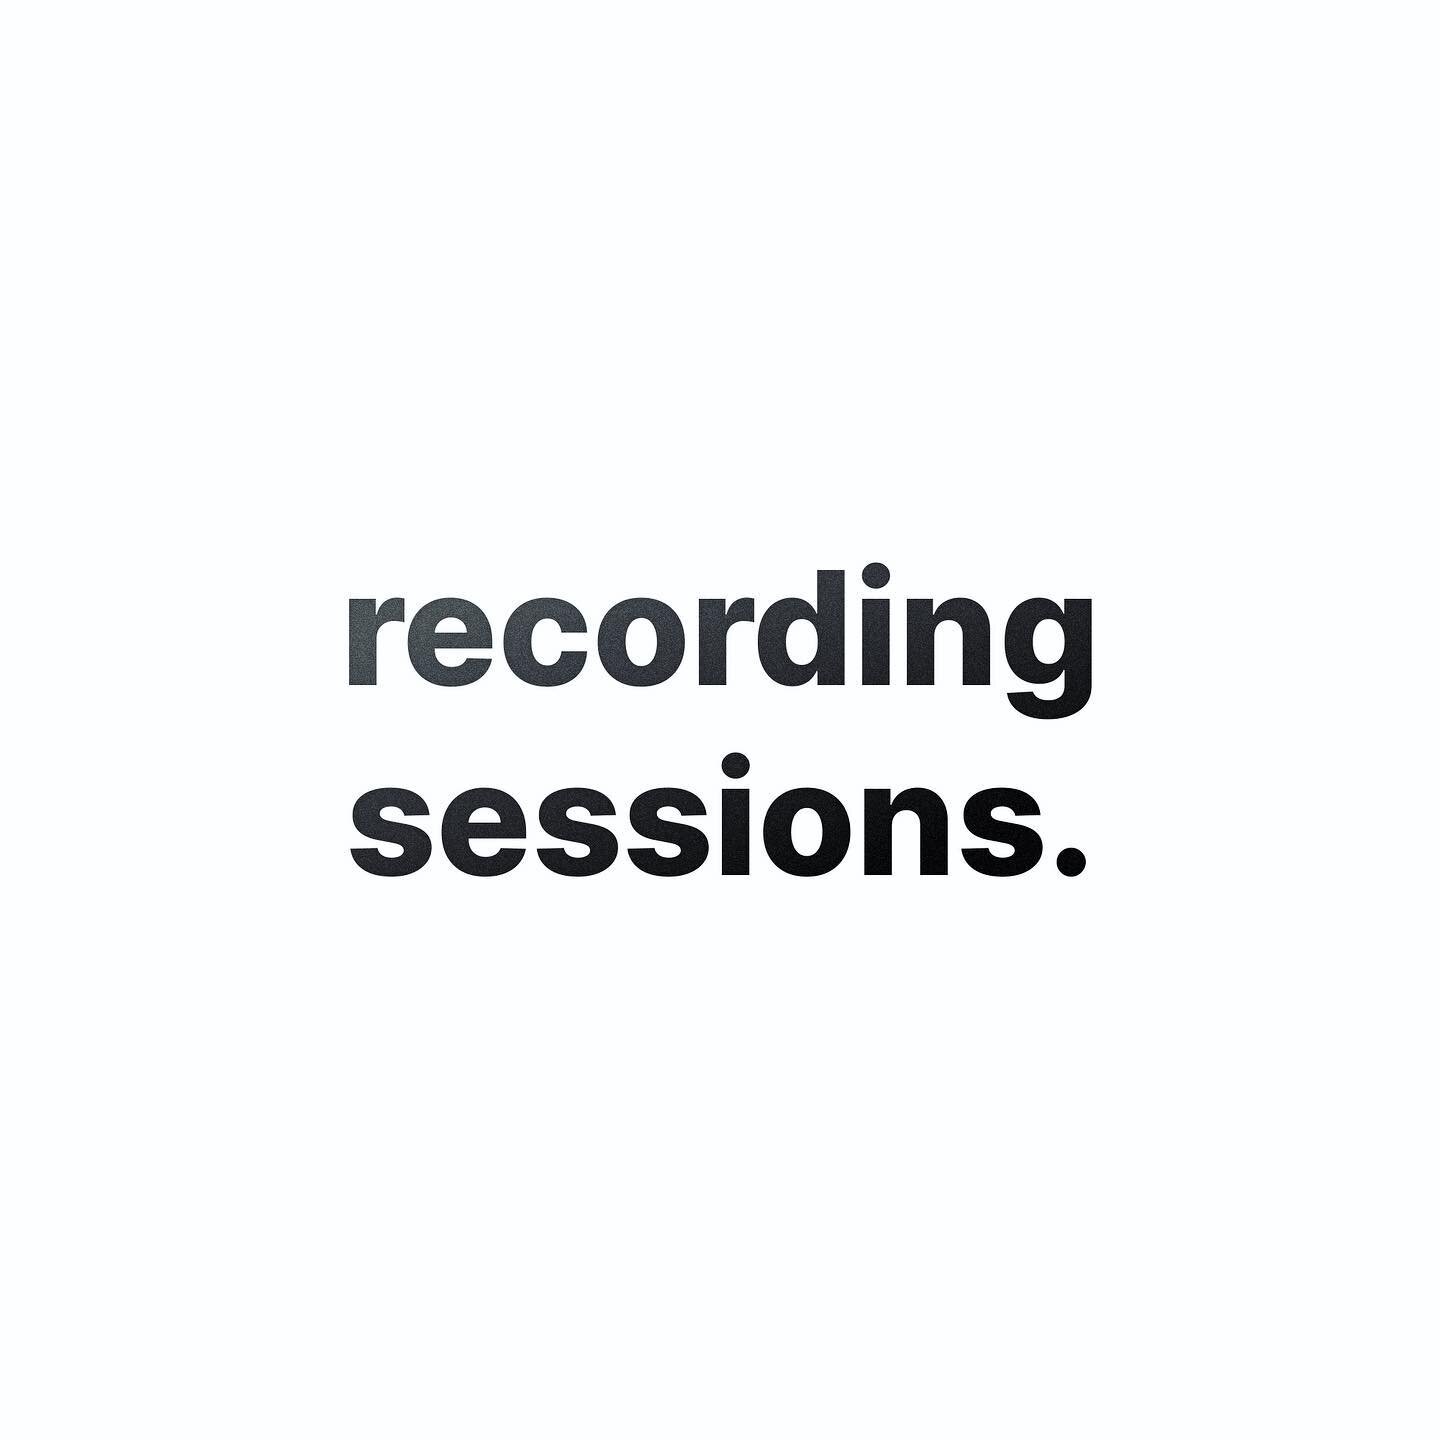 #recordingsession. Elevate your work with high quality strings recorded live for you. 🎻 

We can join you in the studio or remotely record top sounding stems ready to be mixed and mastered in your tracks. 🎚️🎛️

Let&rsquo;s collaborate 🫱🏾&zwj;🫲?